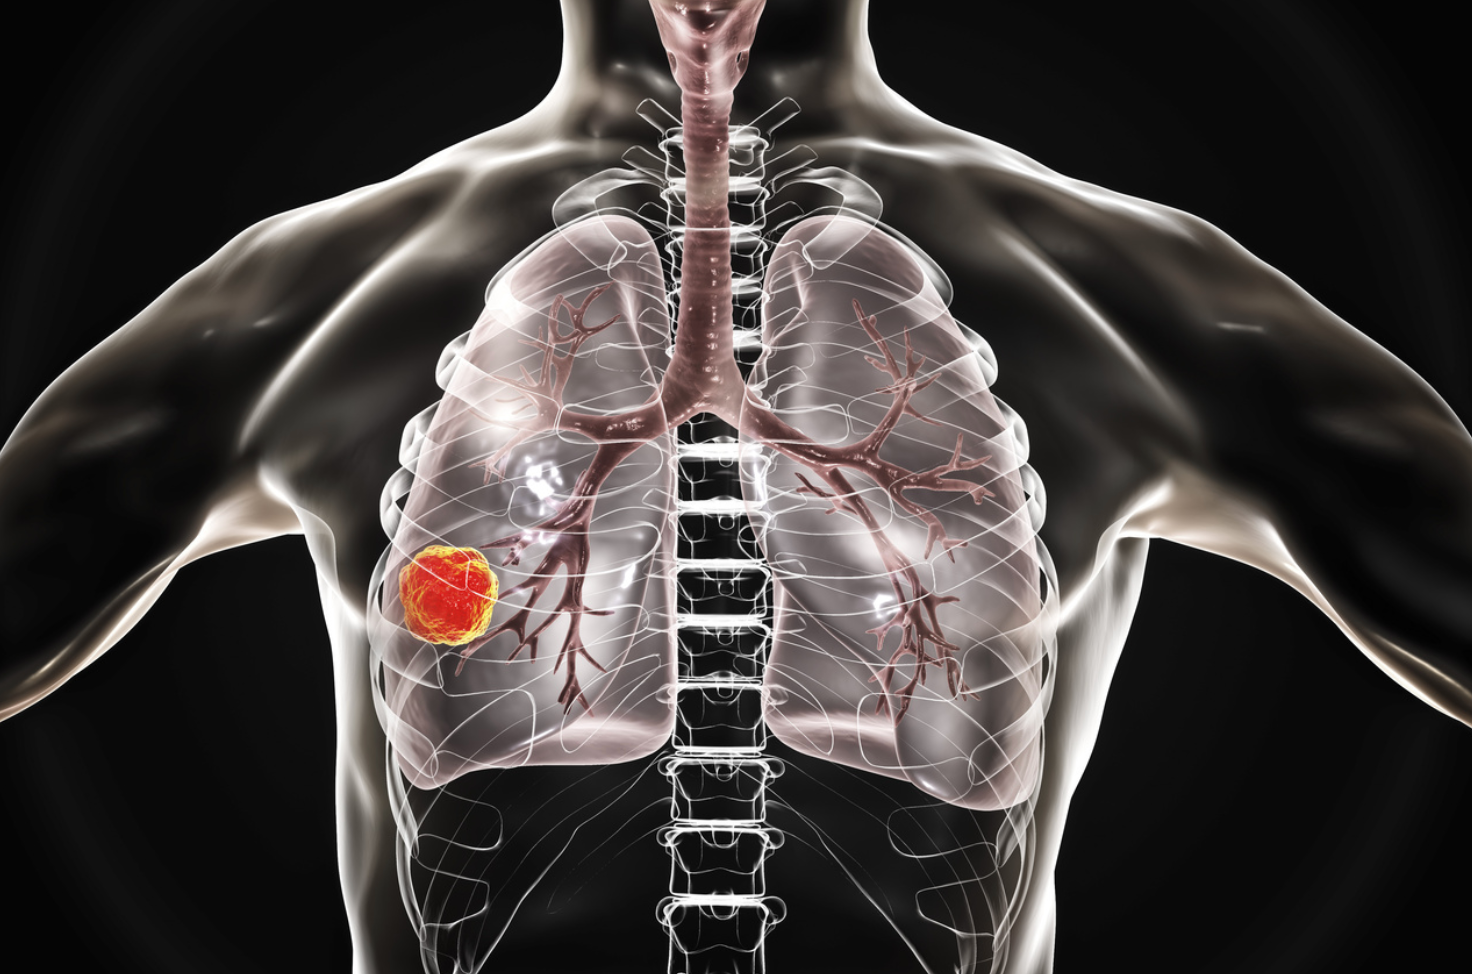 Irinotecan Liposome Injection Gets FDA Fast Track Designation for Second-Line Small Cell Lung Cancer